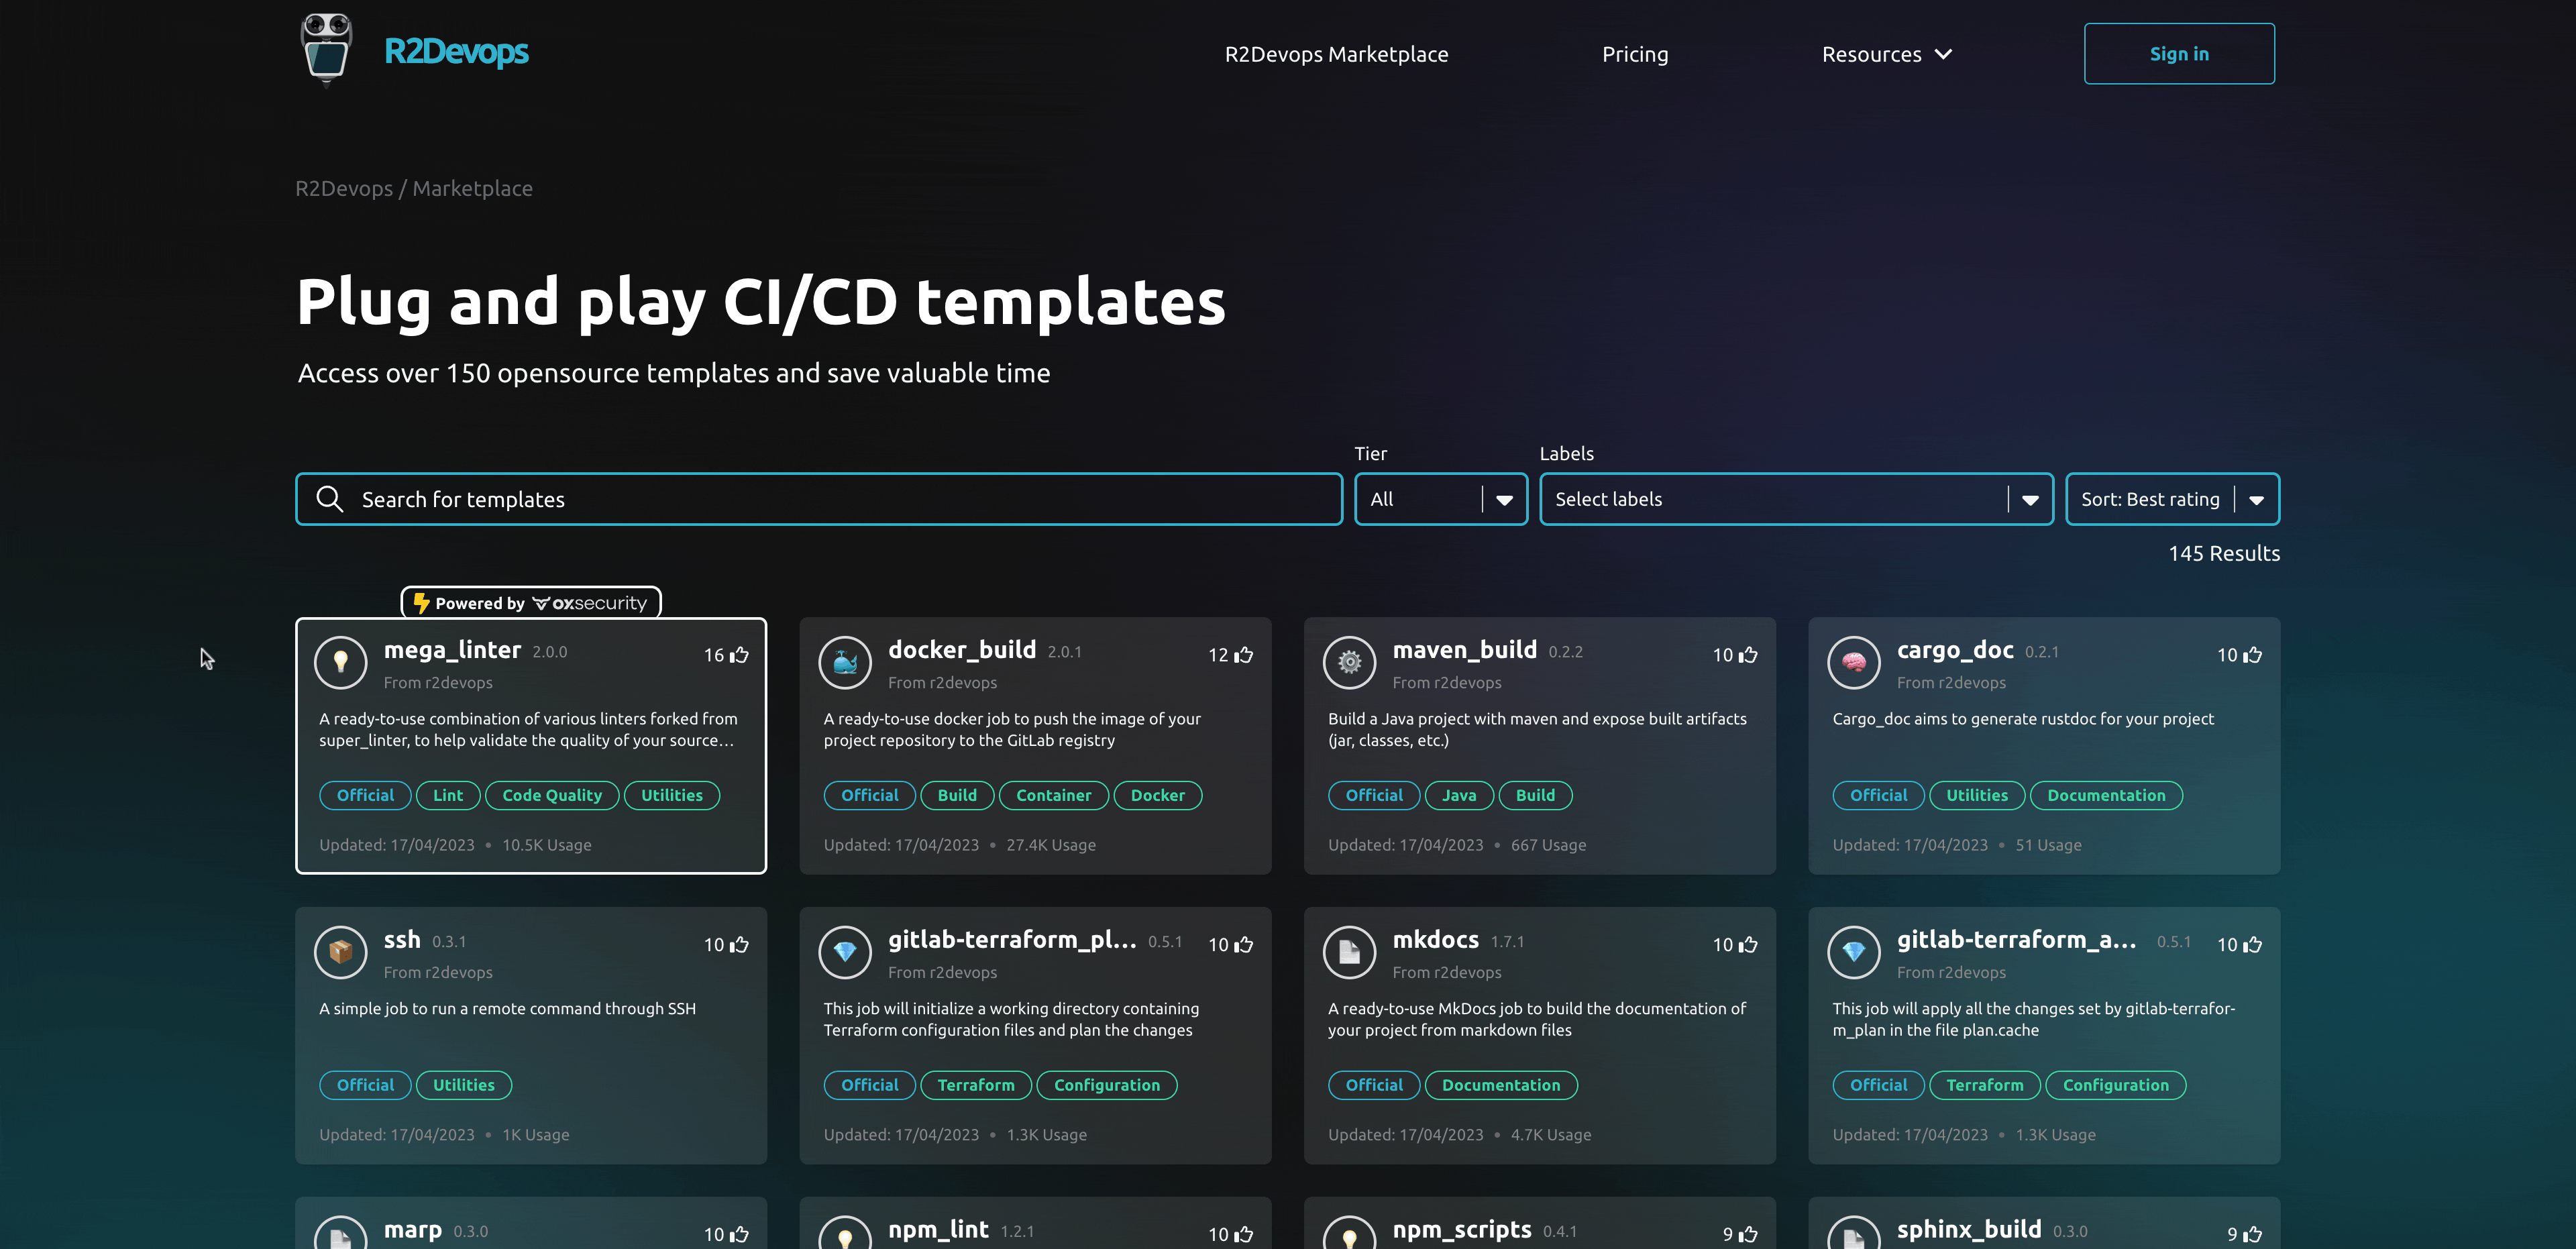 GIF of the R2Devops' Marketplace